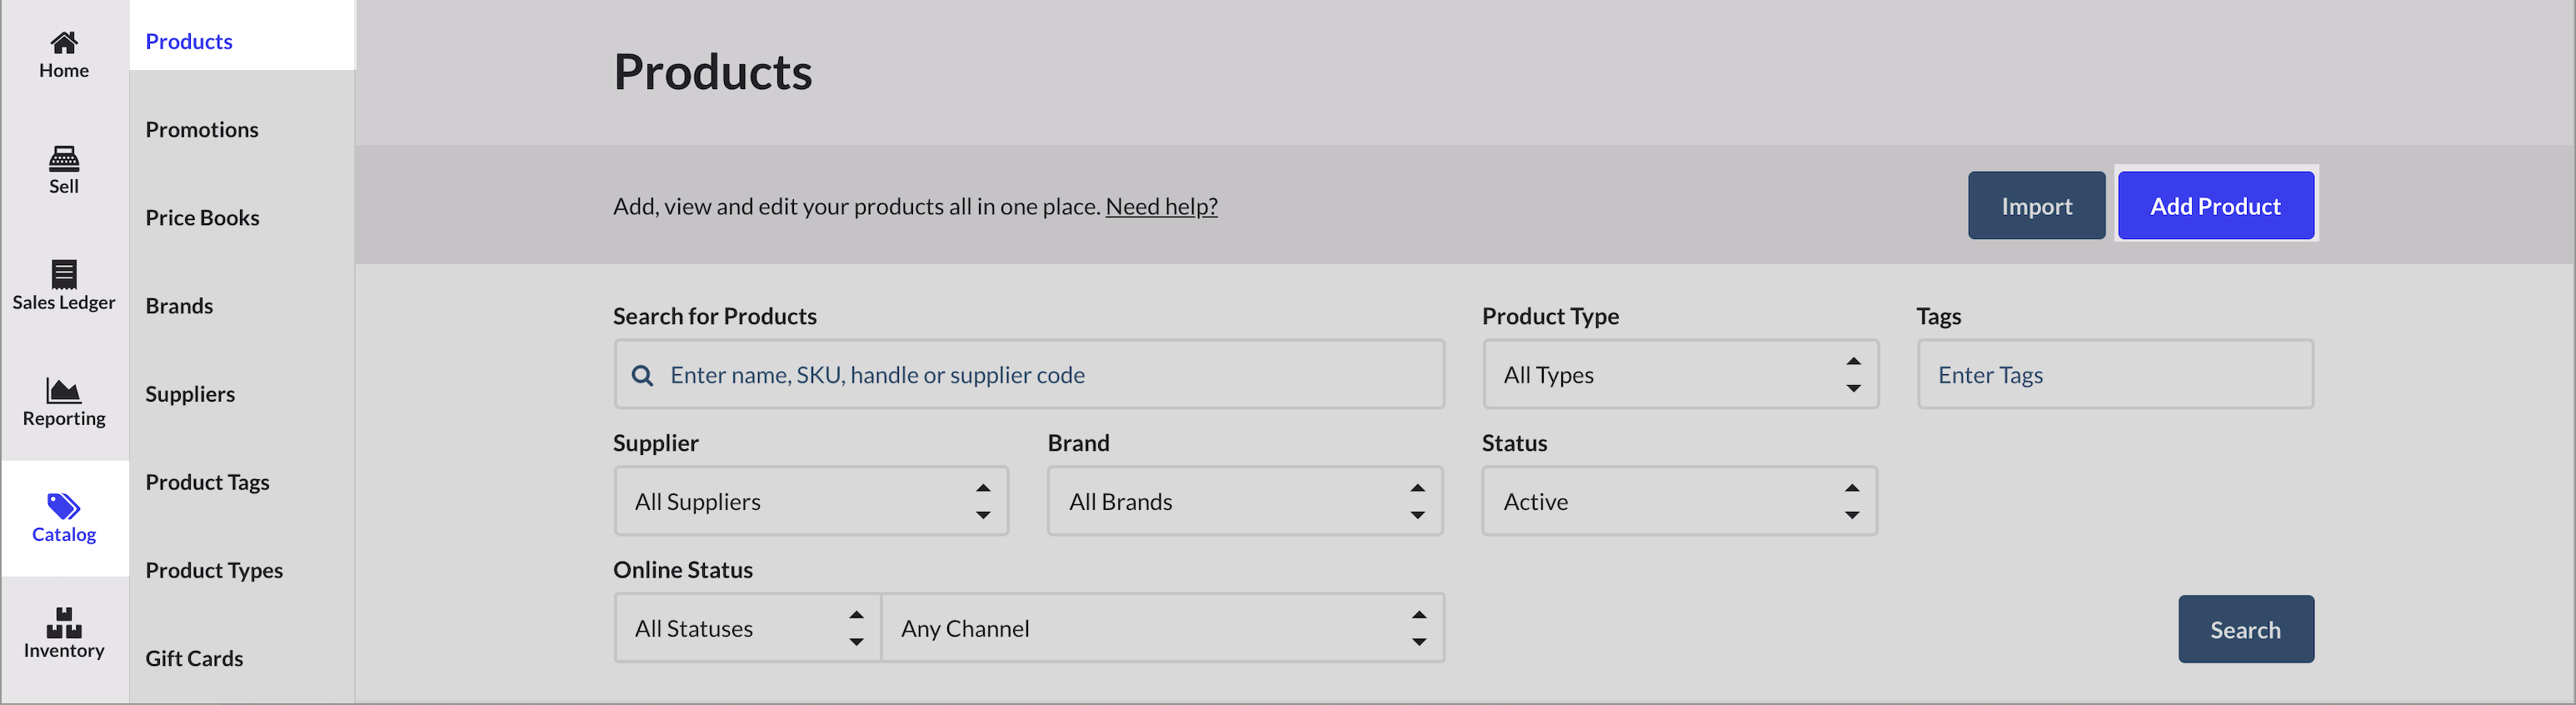 The Product section showing the Add Product button highlighted.